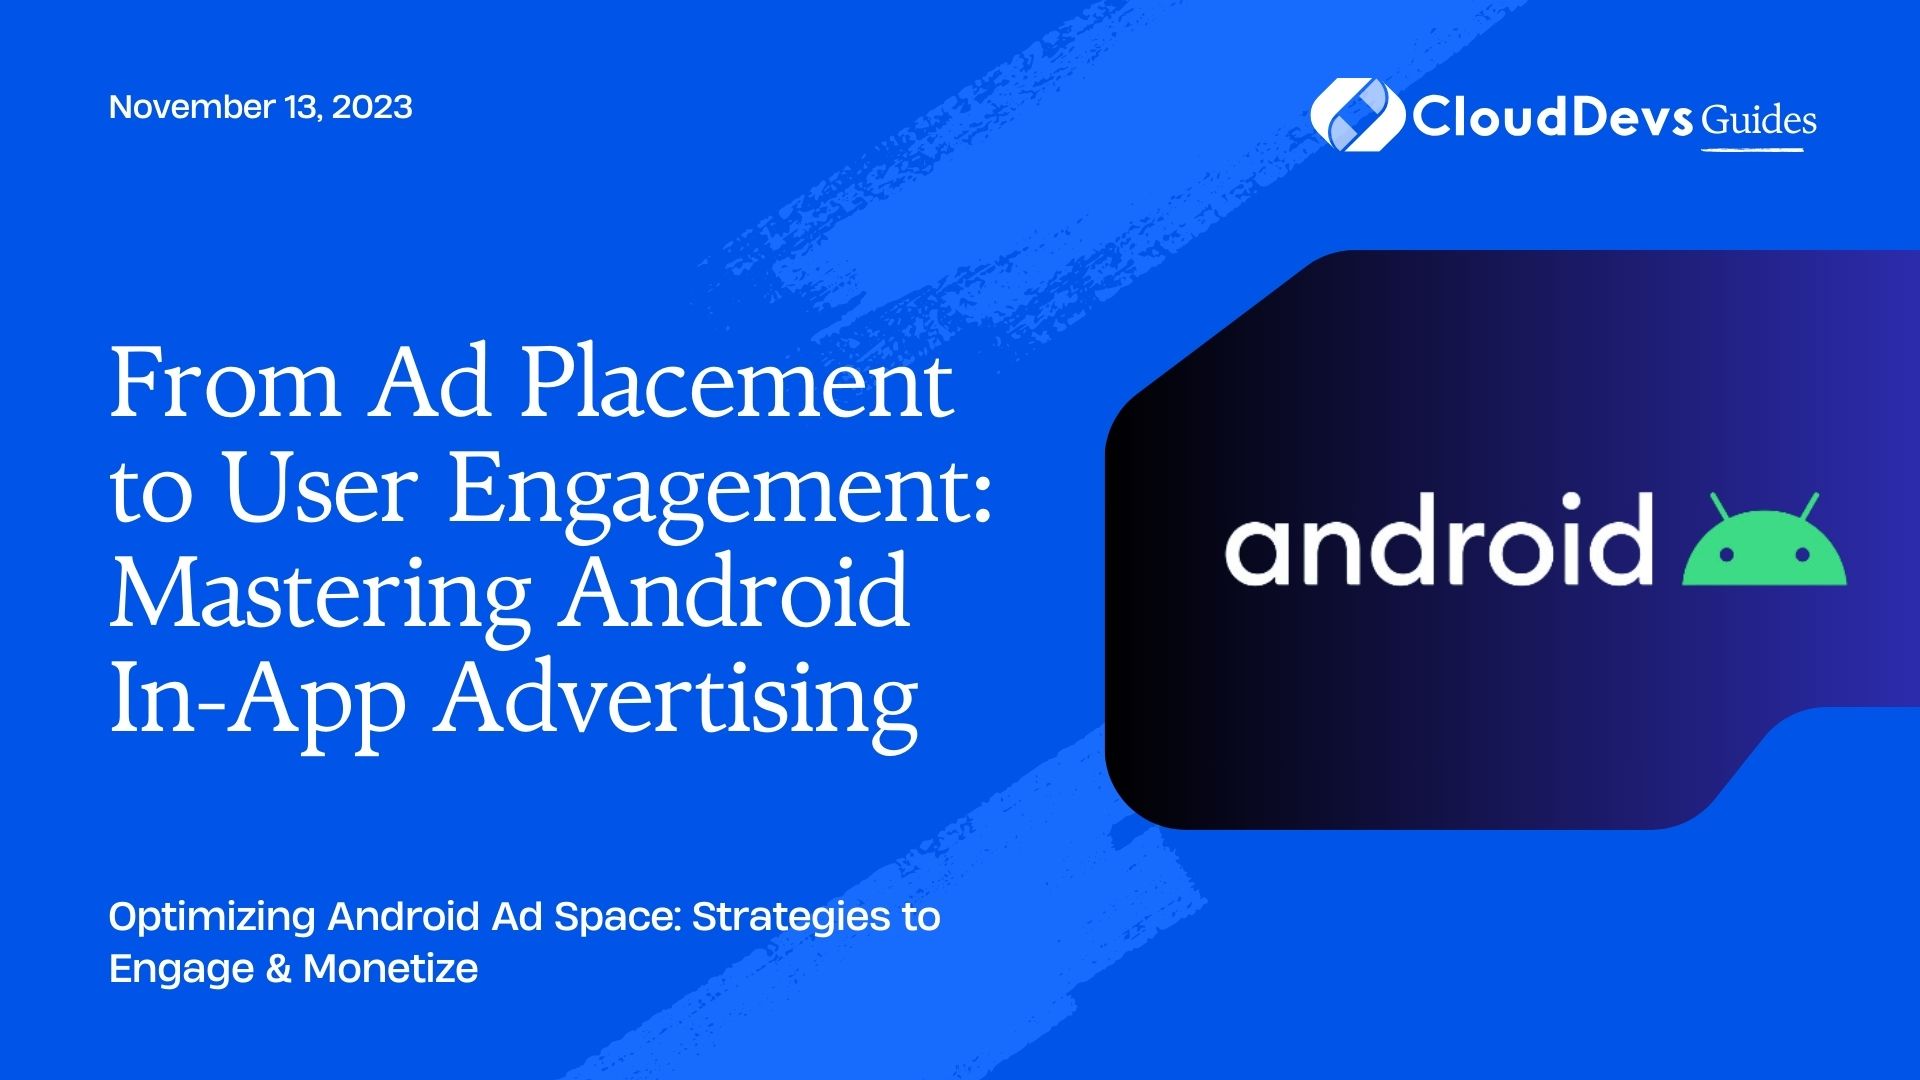 From Ad Placement to User Engagement: Mastering Android In-App Advertising